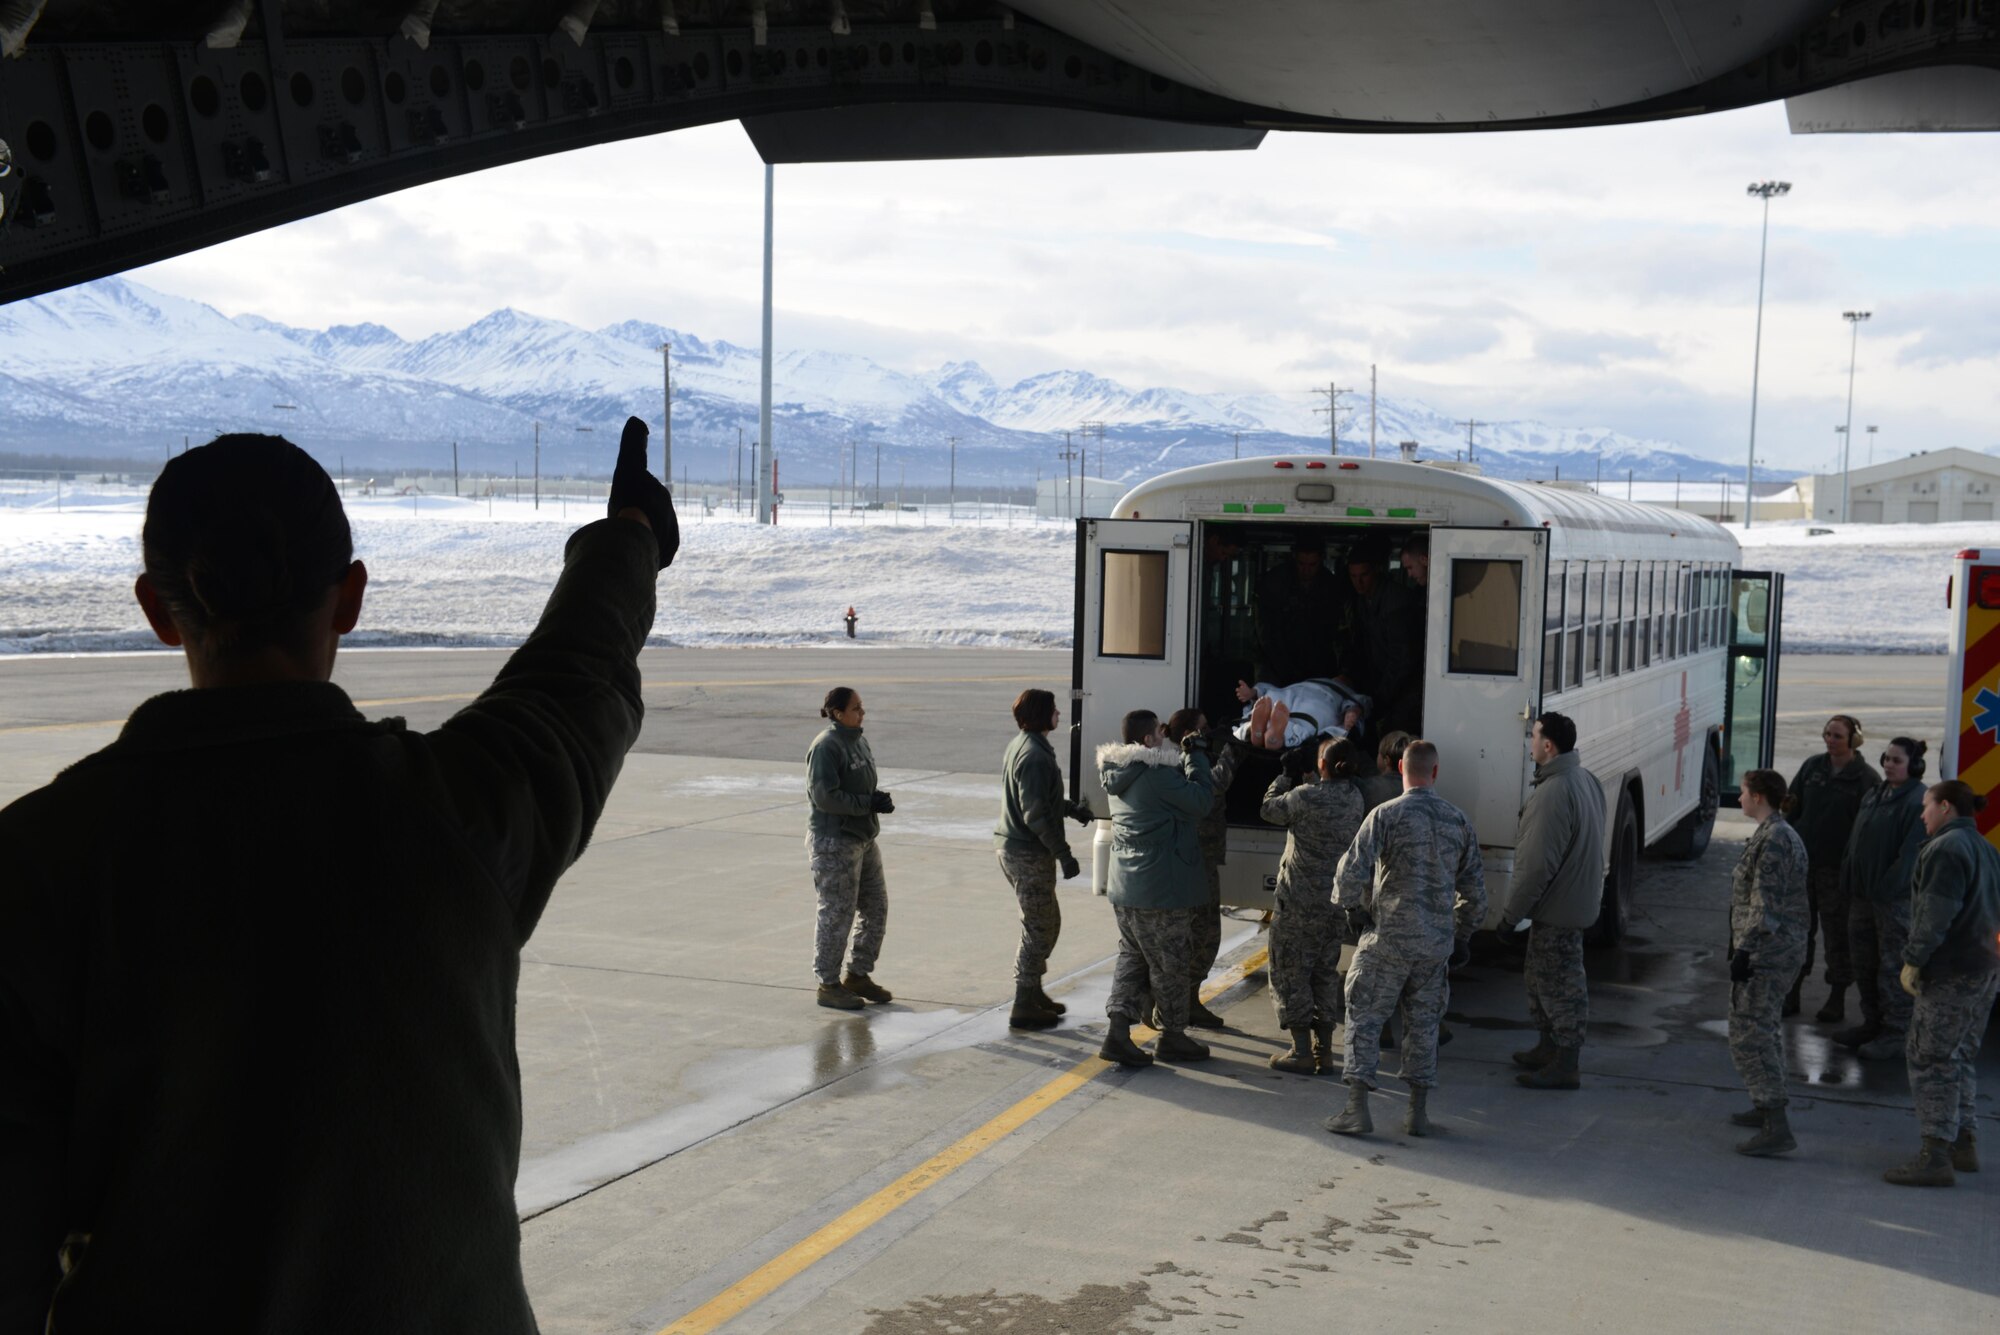 U.S. Air Force Capt. Leslie Mead, 673d Medical Group, gives the signal for the next simulated patient to be transported into a C-17 Globemaster III during the EnRoute Patient Staging System exercise at Joint Base Elmendorf-Richardson, Alaska, April 3, 2017. The ERPSS provides patient reception, limited emergent intervention, and ensures patients are medically and administratively prepared for flight in a safe and timely aeromedical evacuation. 